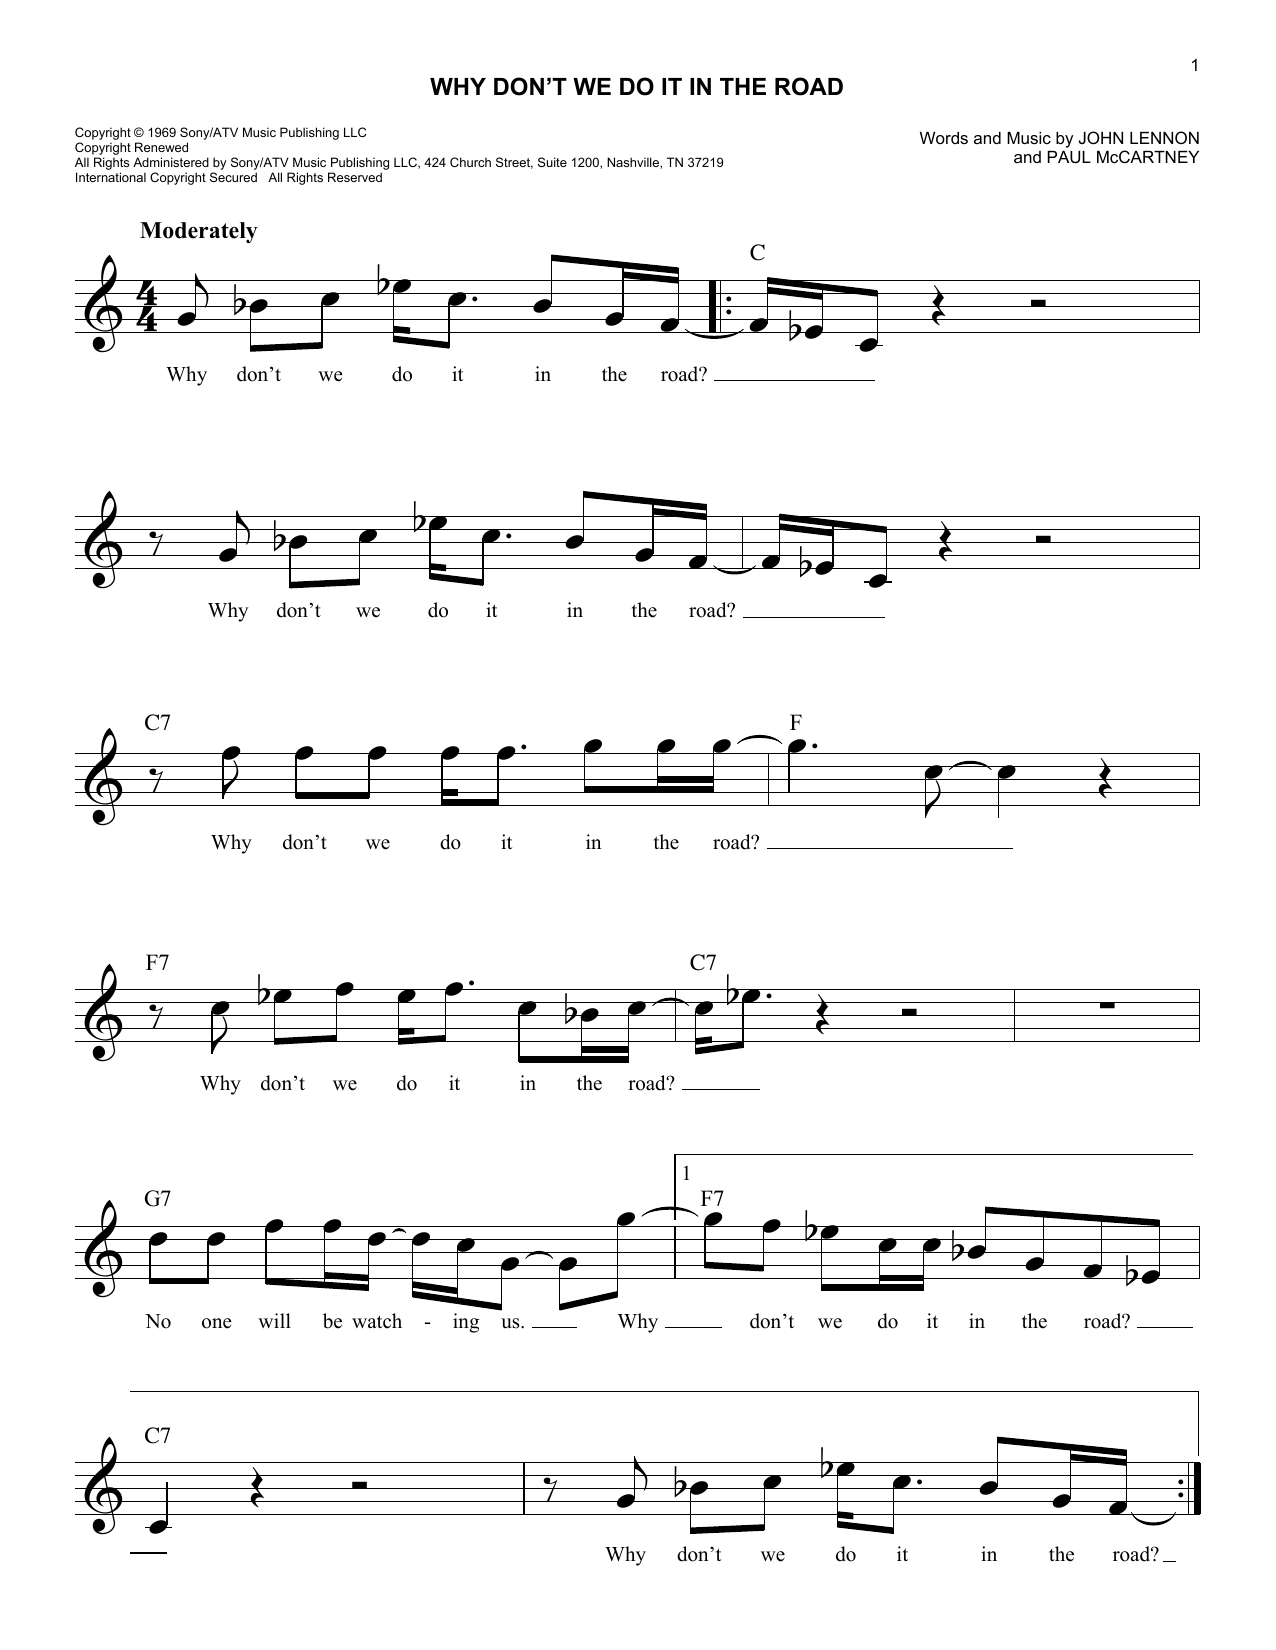 Download The Beatles Why Don't We Do It In The Road Sheet Music